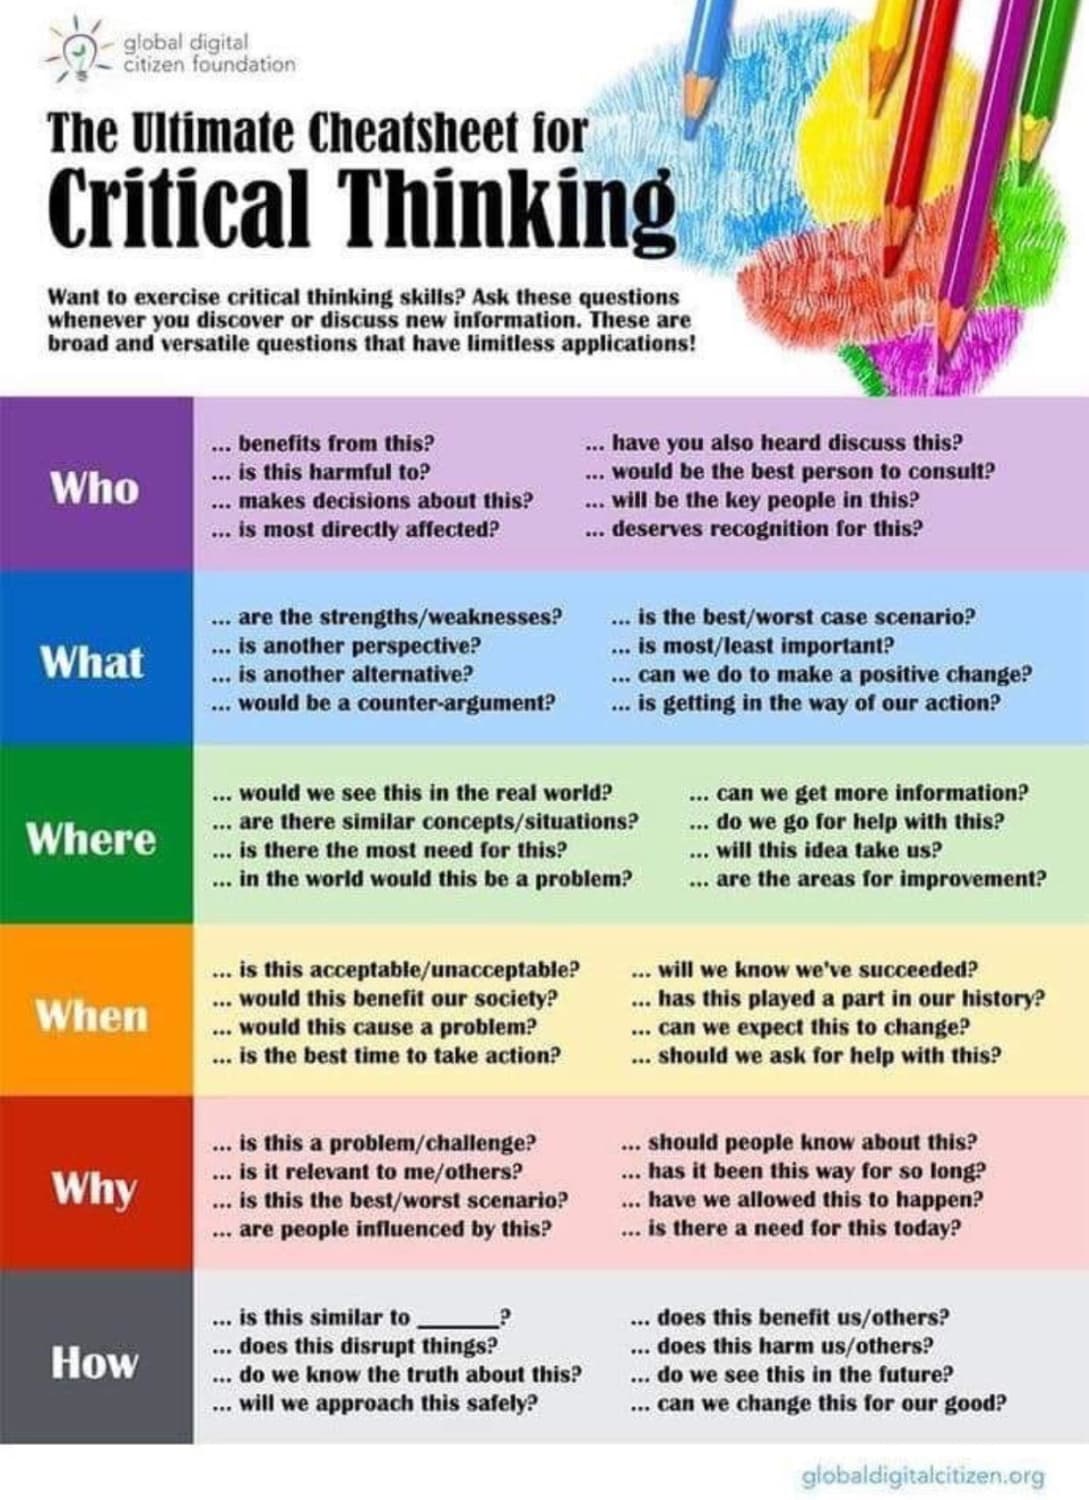 An extremely useful guide to aid in critical thinking